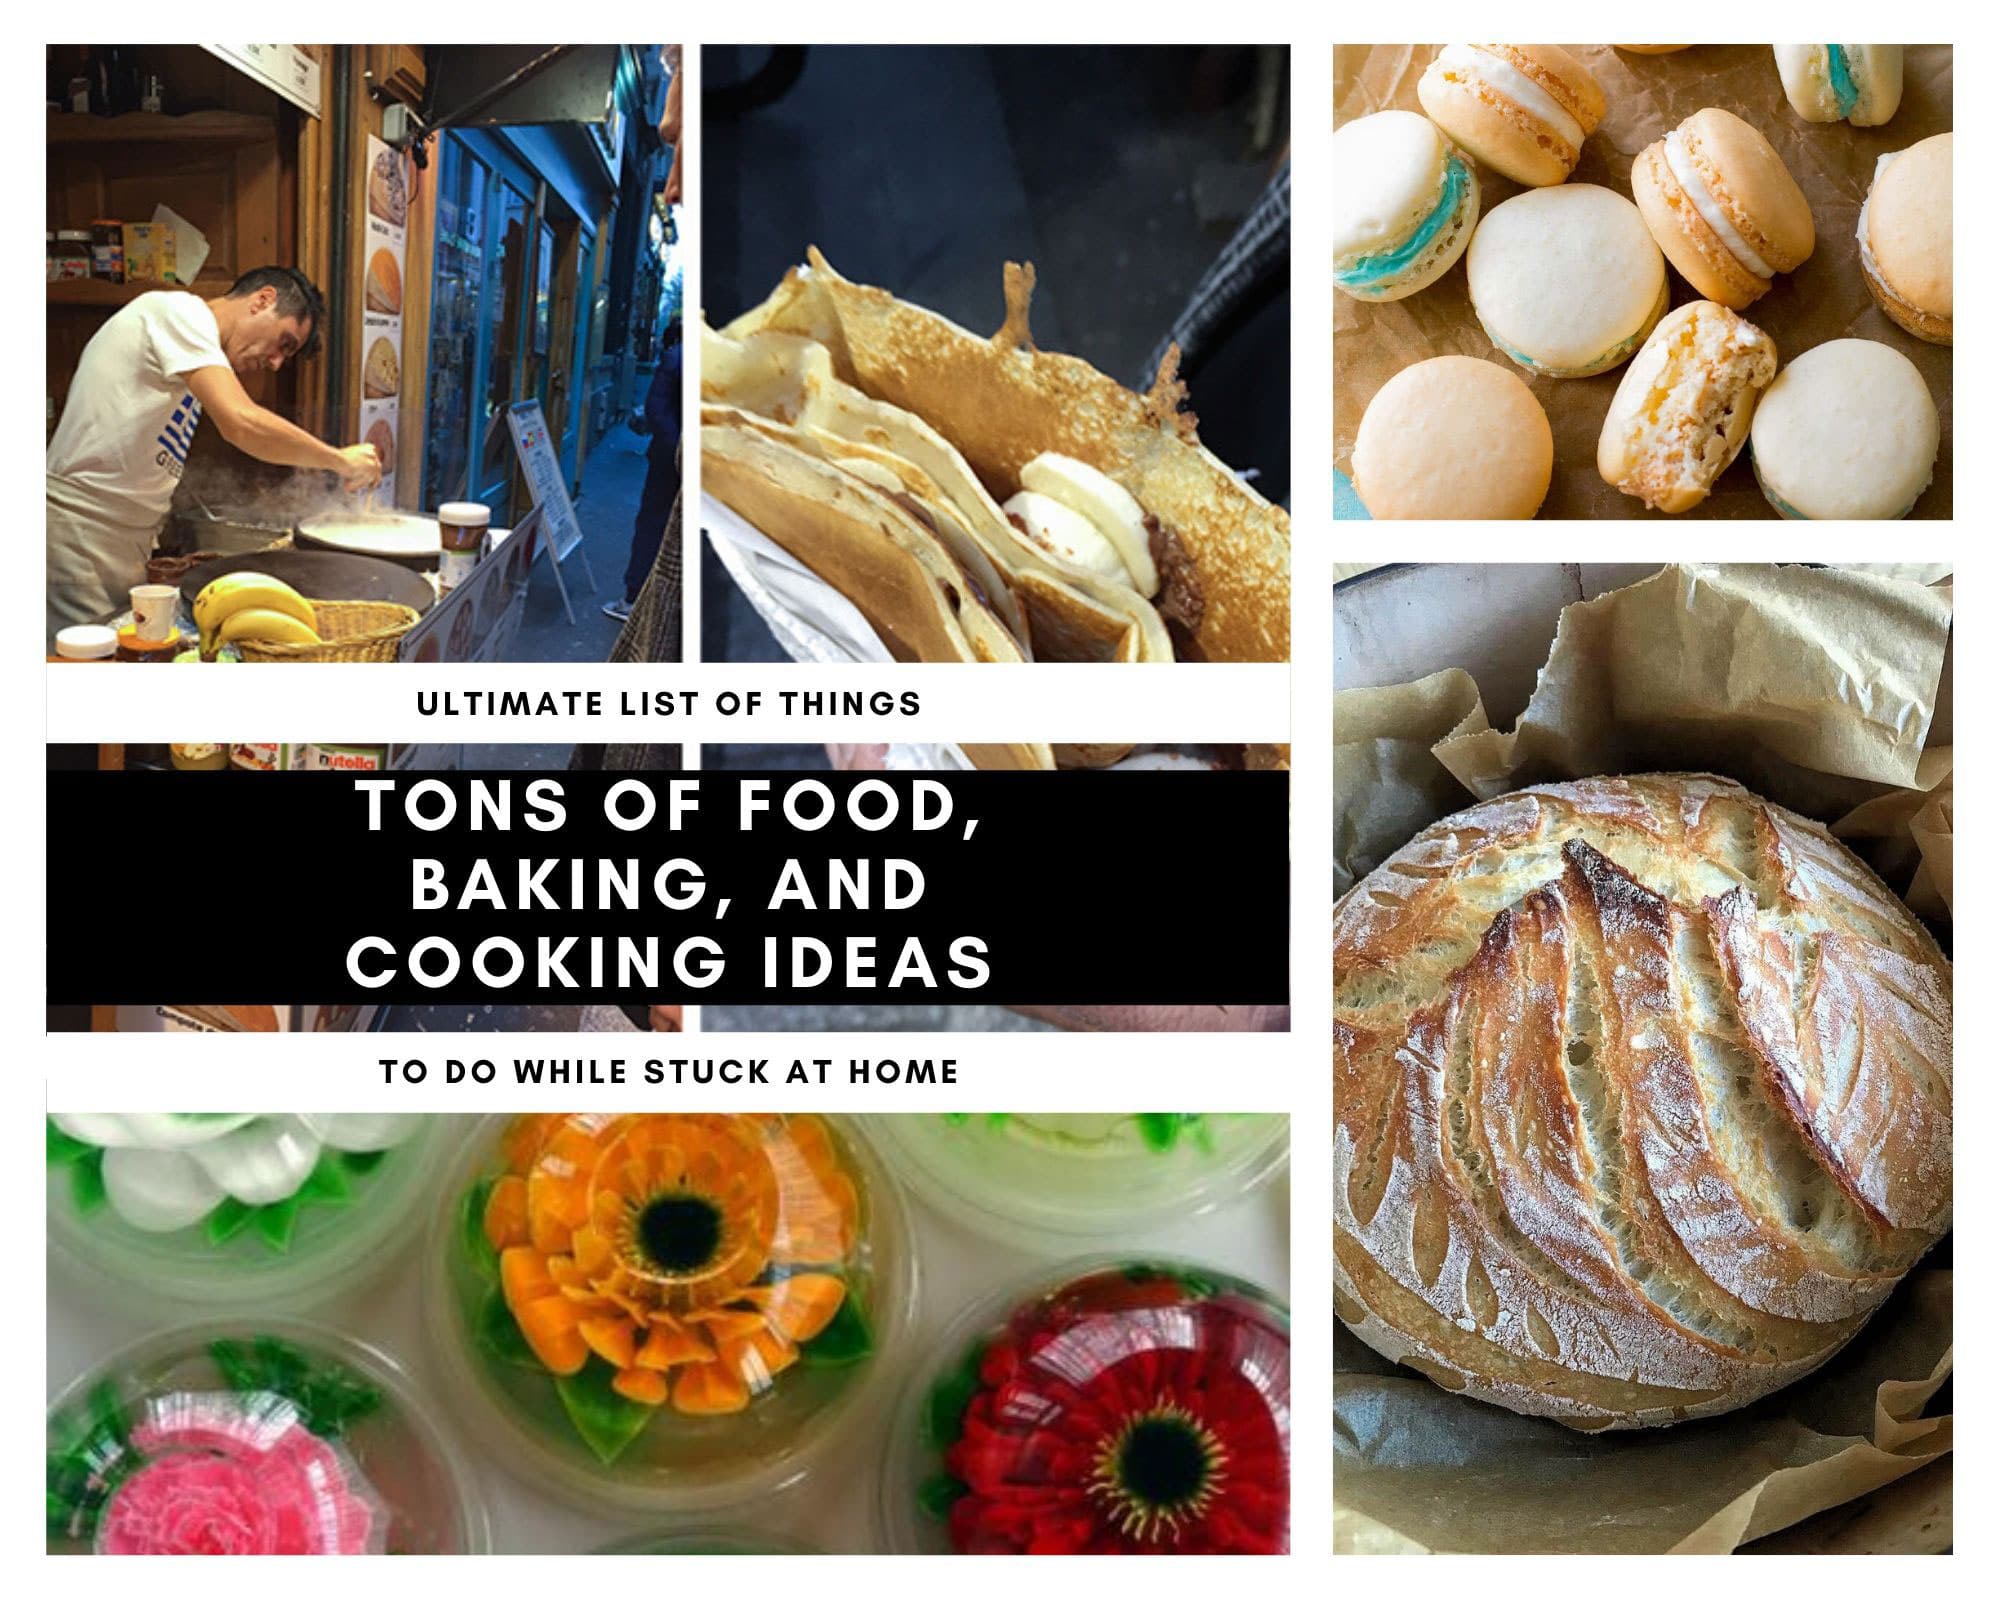 photo collage of food items and text-man making crepes, closeup of folded crepe with bananas, overhead view of neutral colored French macarons, loaf of sourdough bead, orange and red flowers in gelatin domes